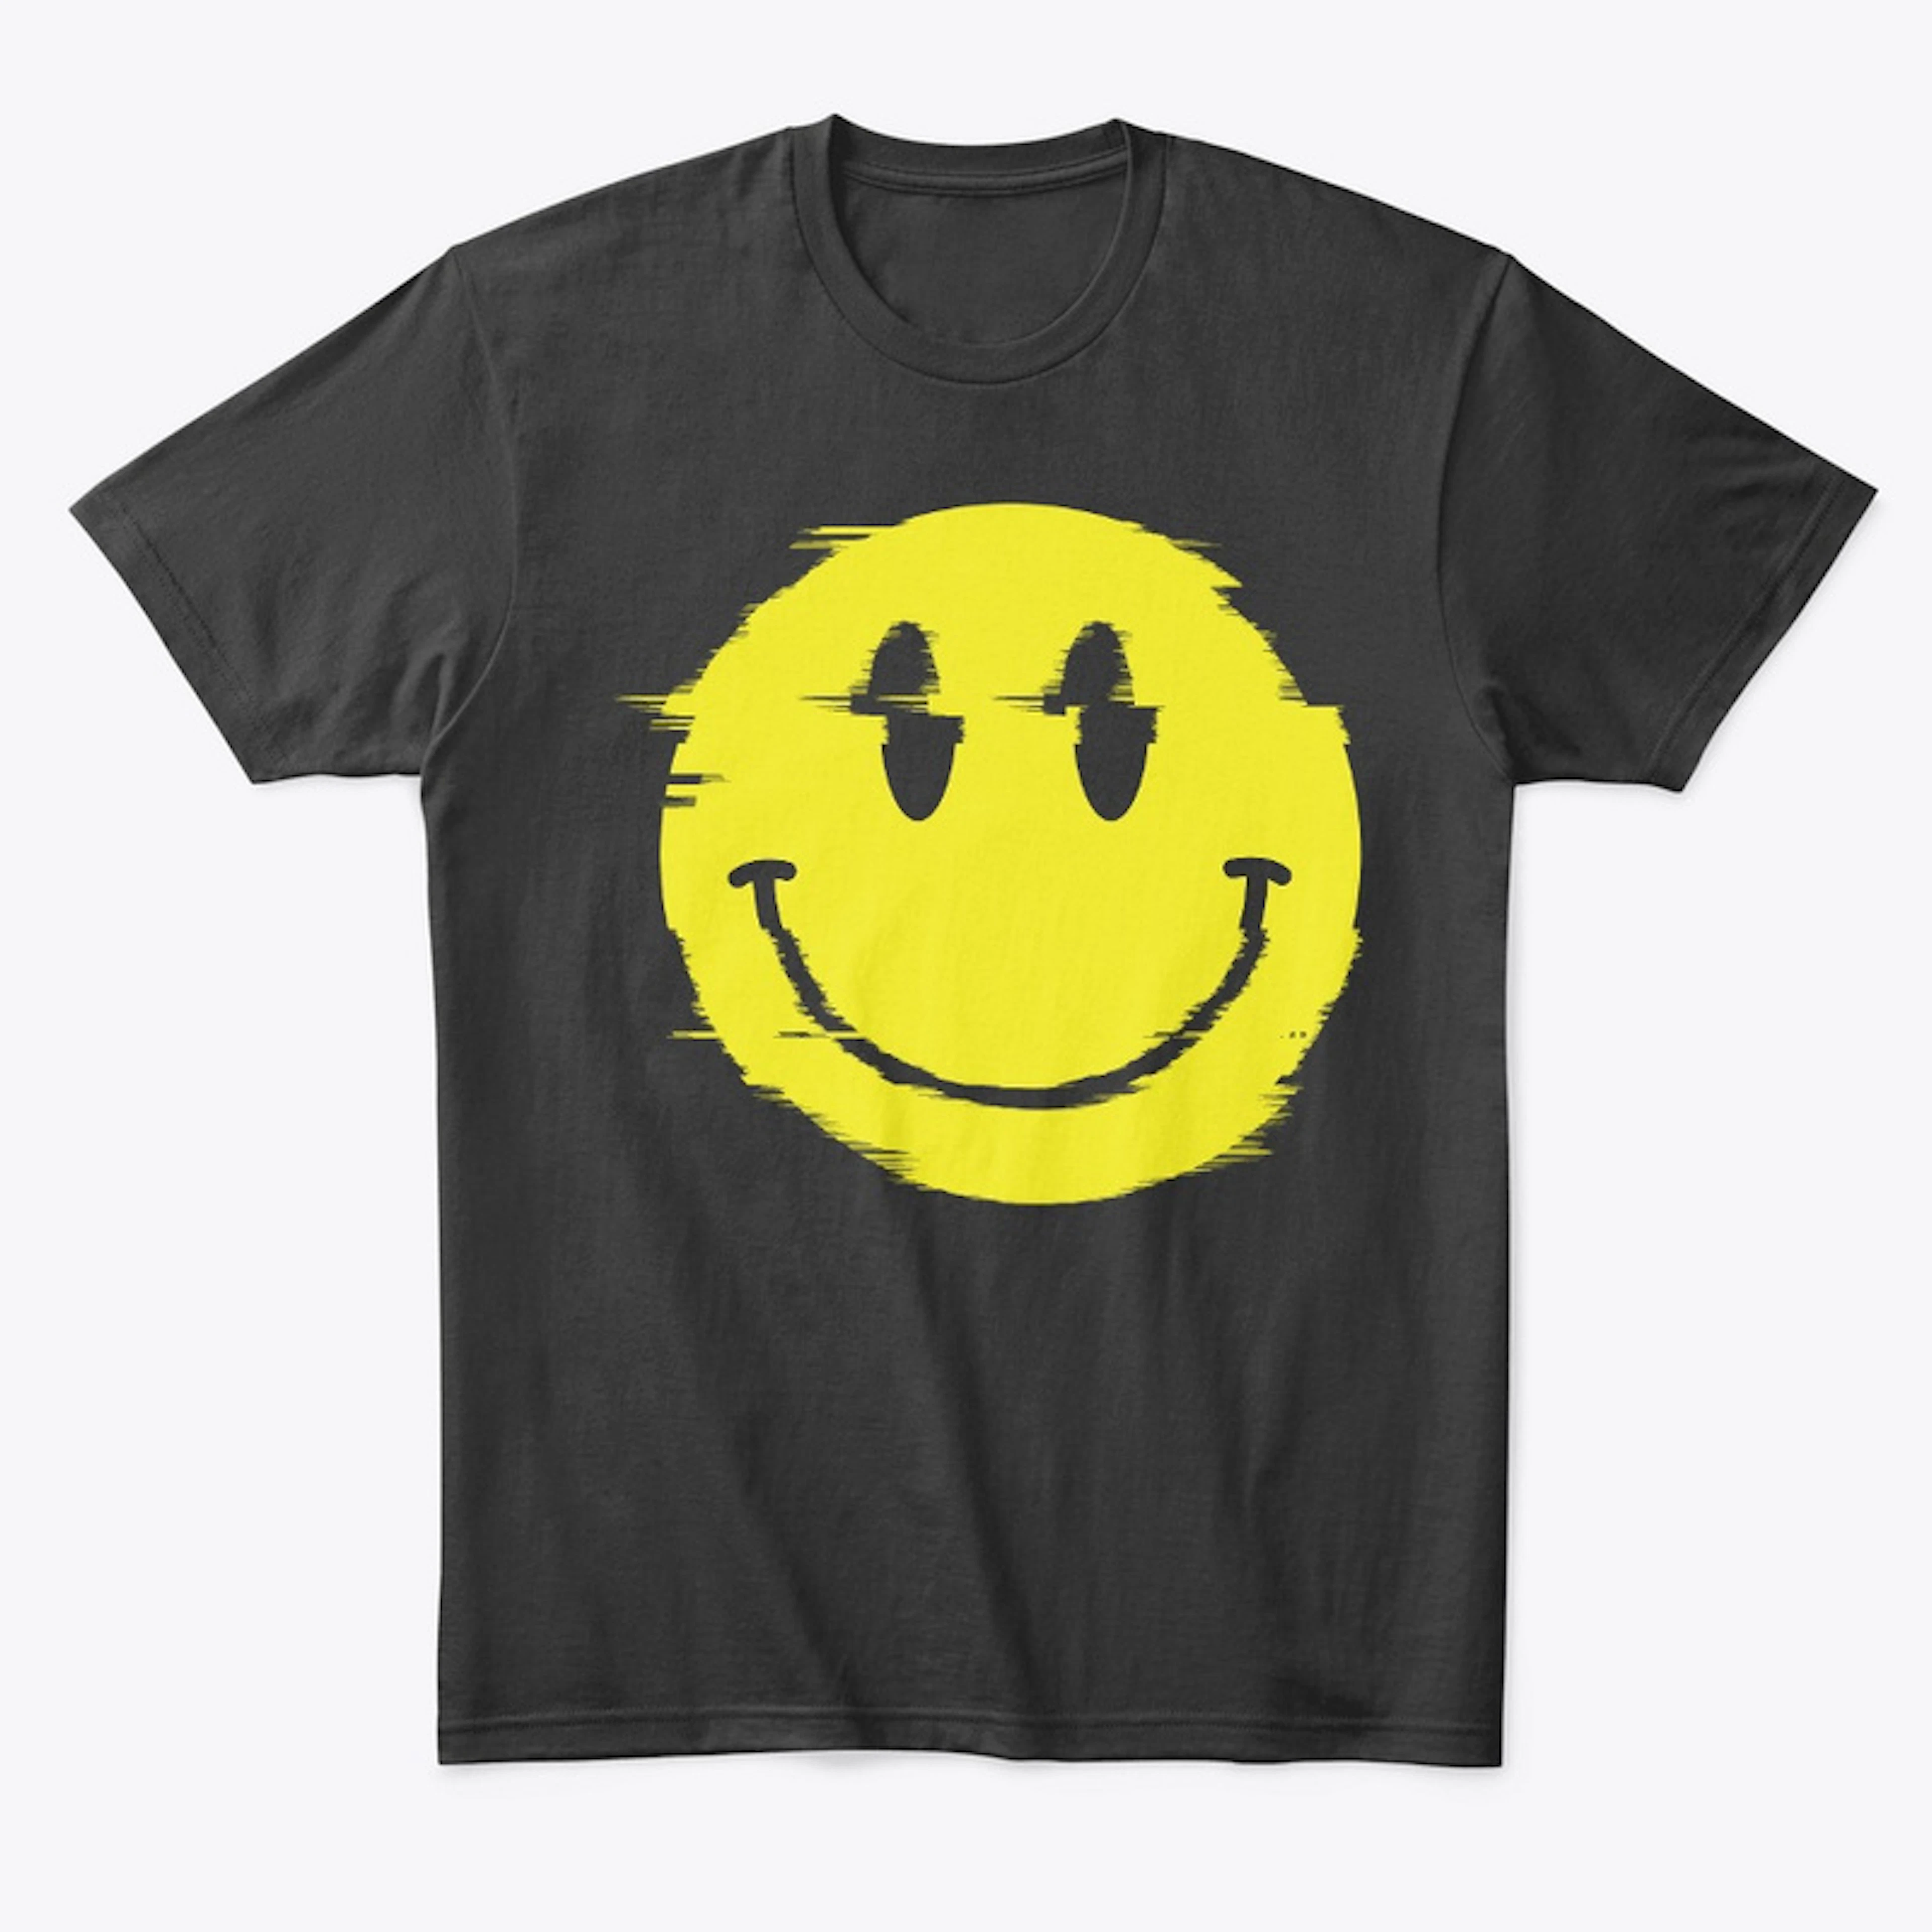 MESSED-UP SMILEY FACE UNISEX TEE